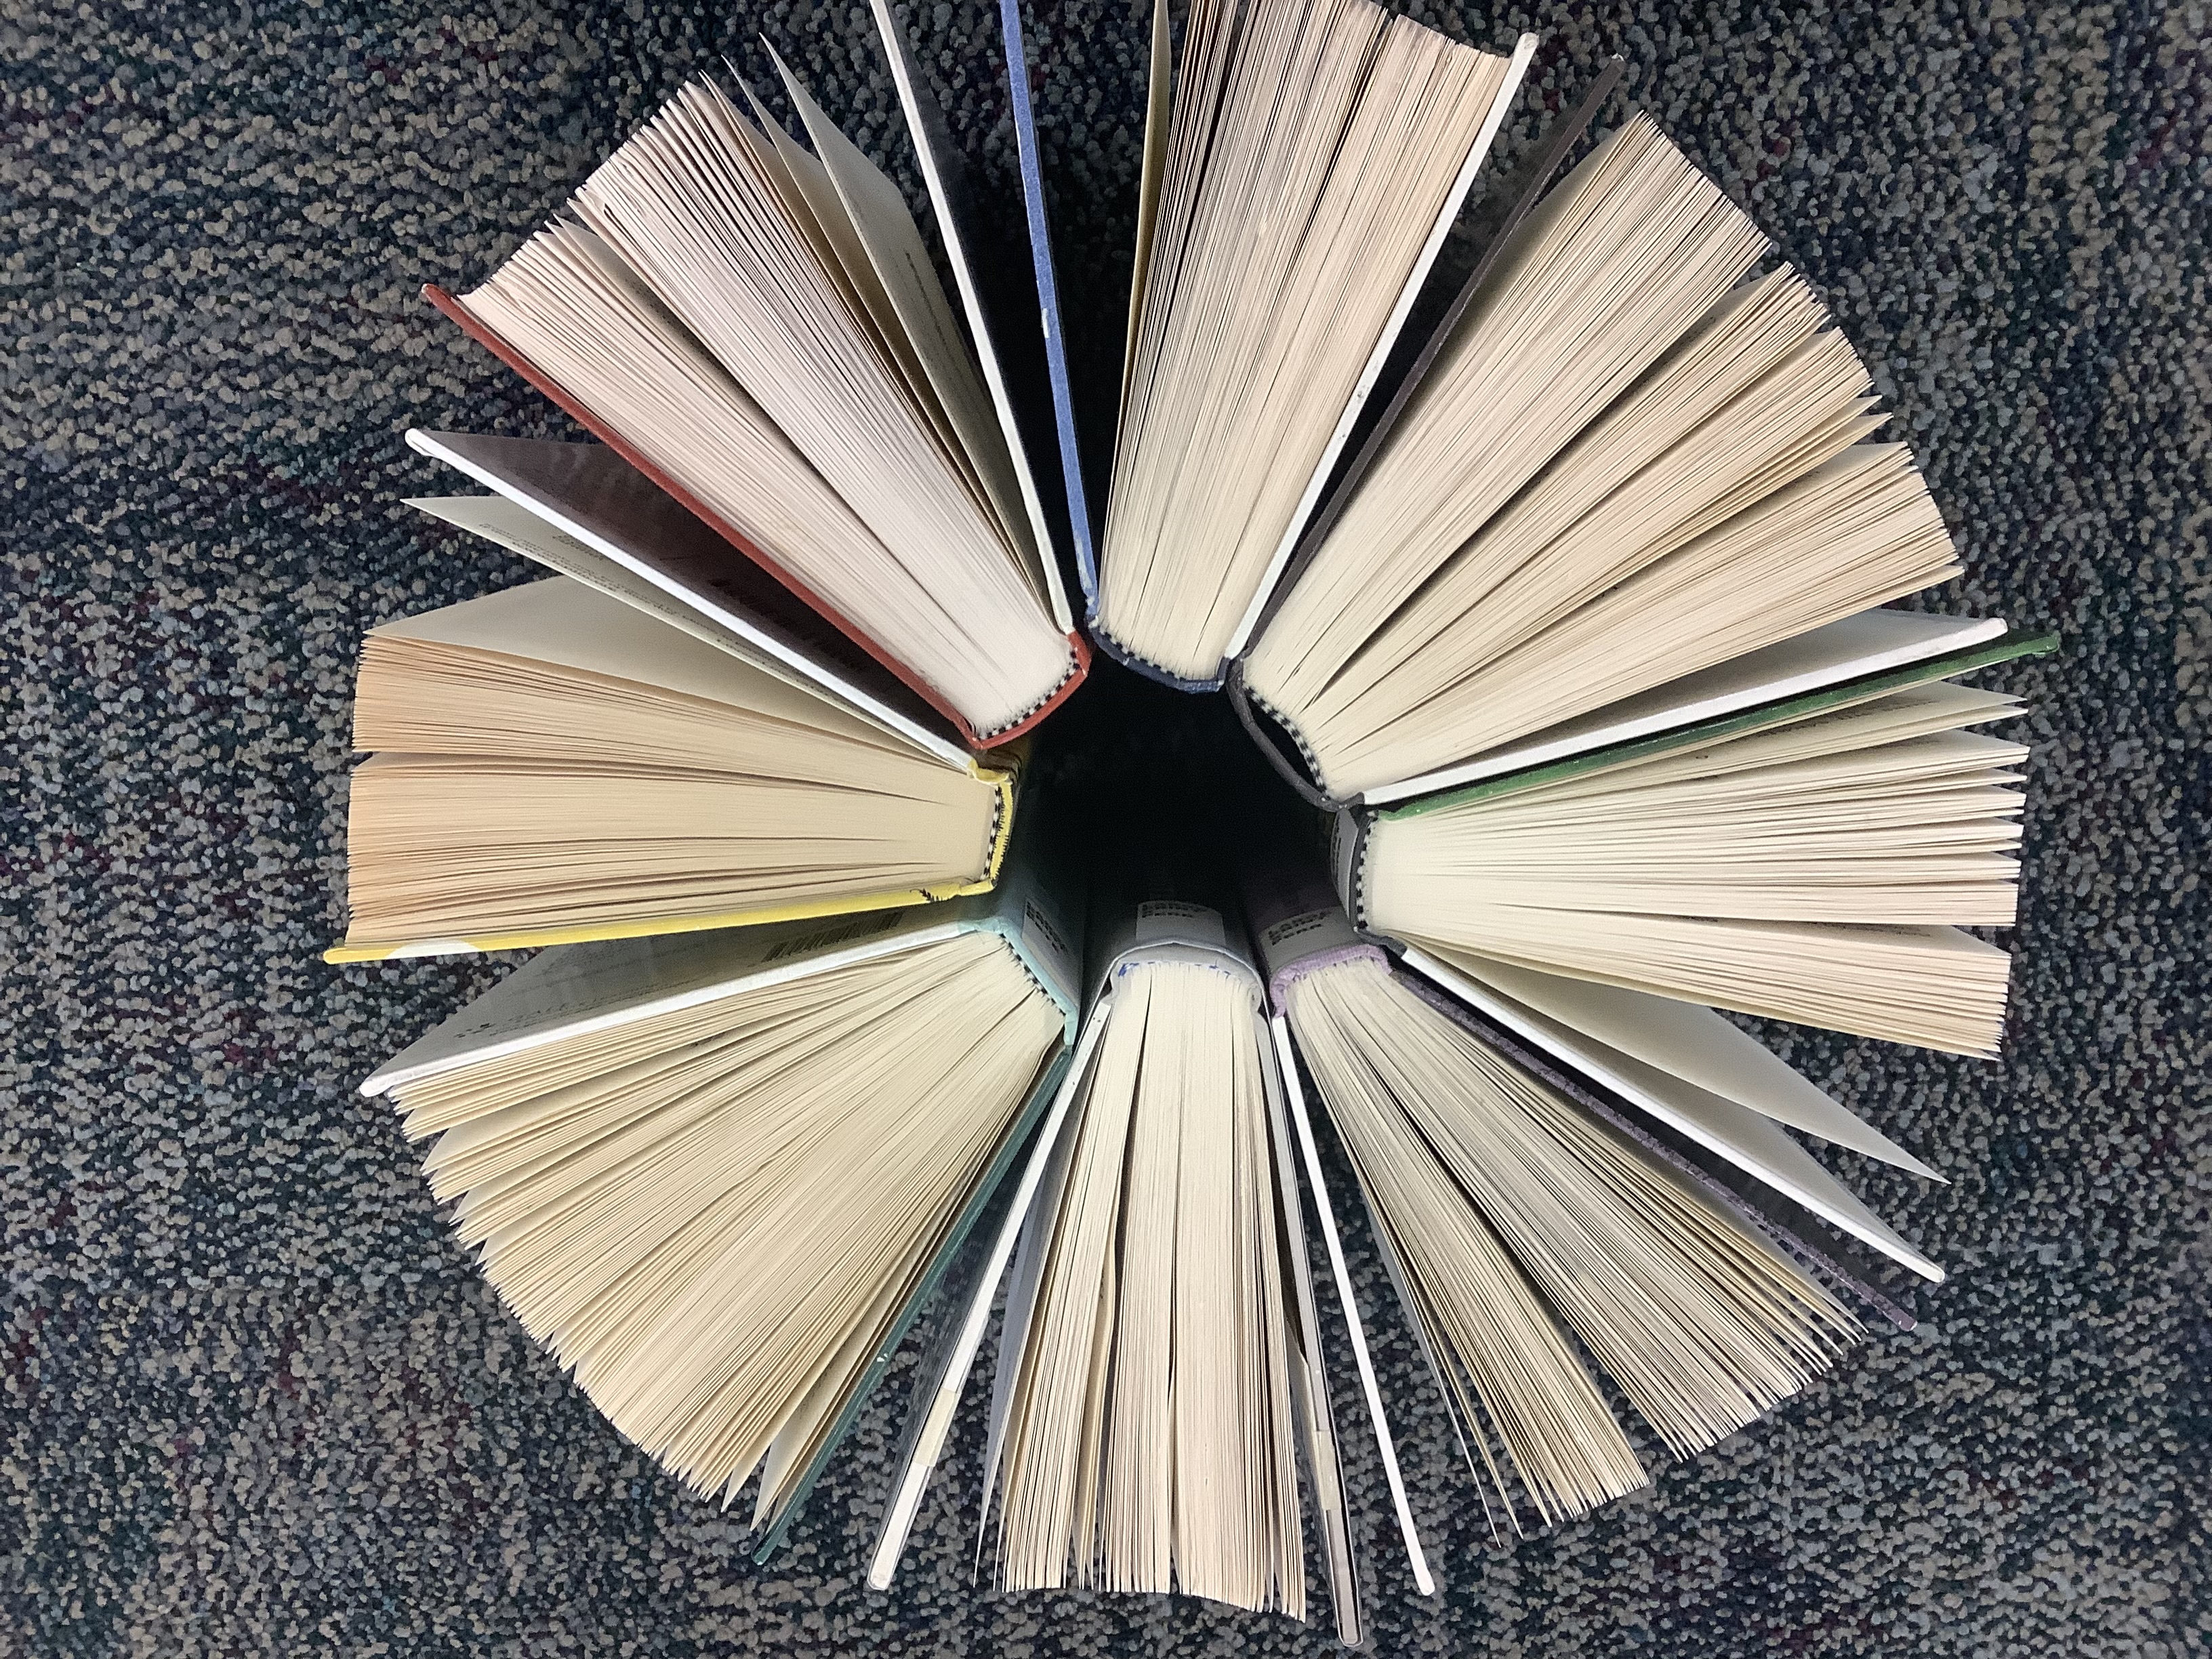 Books standing in a circle, spines inward, shot from above